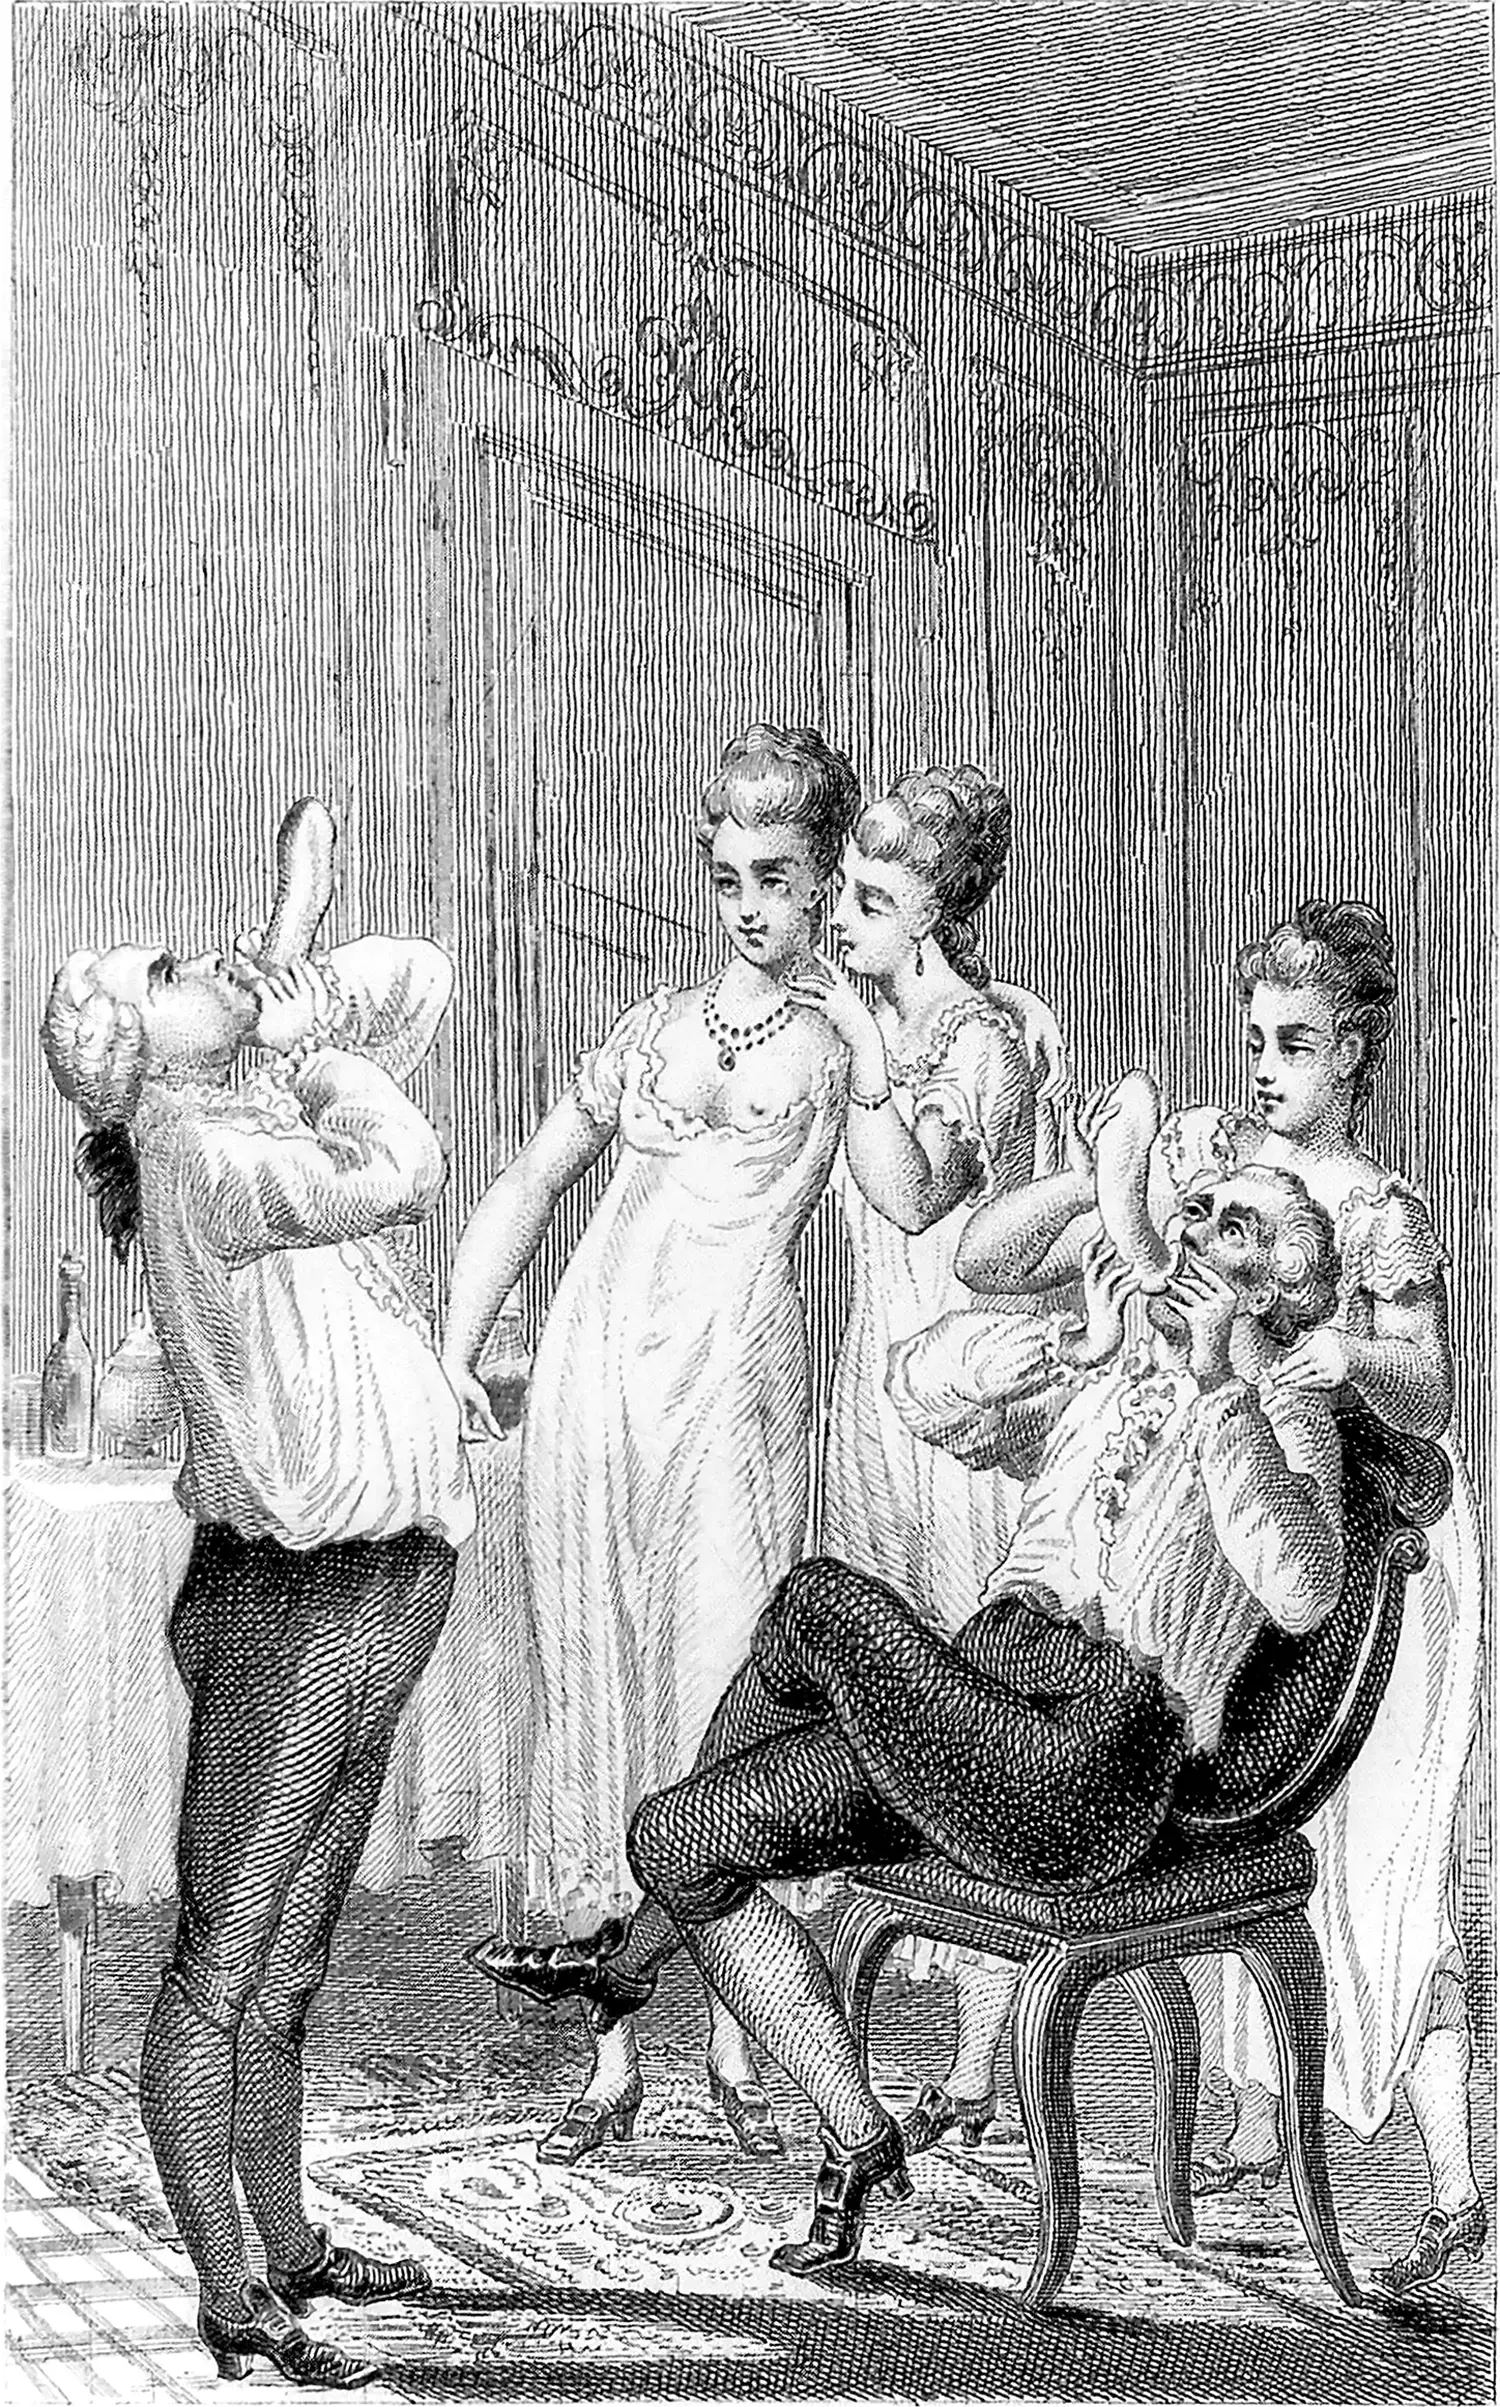 Giacomo Casanova and another man test condoms by blowing them up as the ladies they’re with heartily laugh on.